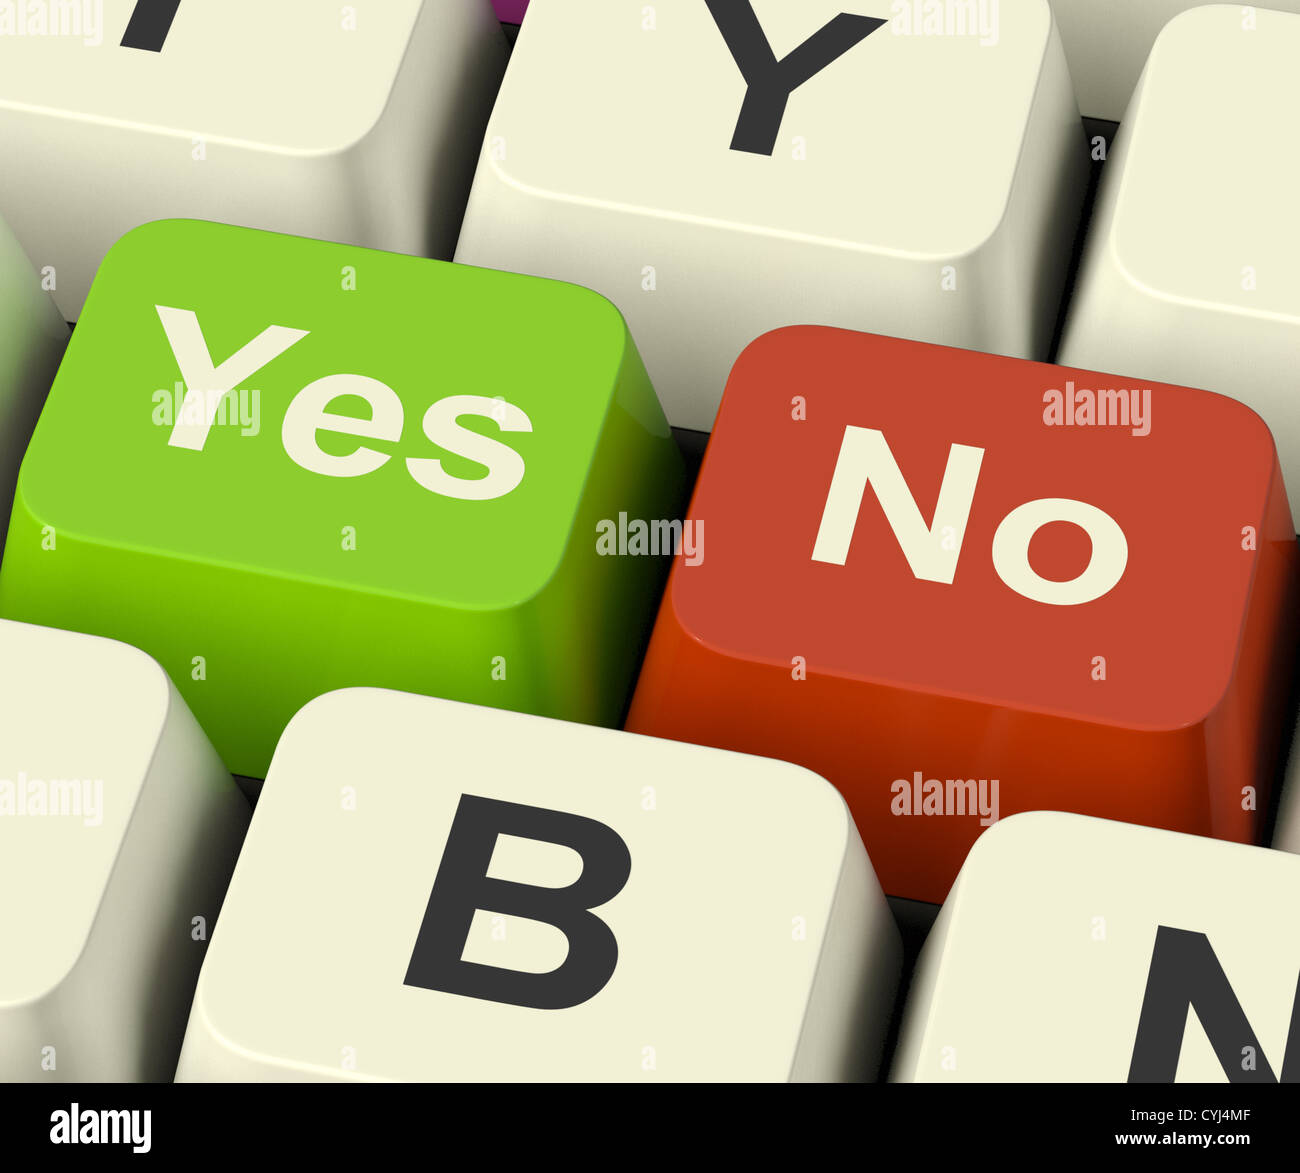 Yes No Keys Represent Uncertainty And Decisions Online Stock Photo